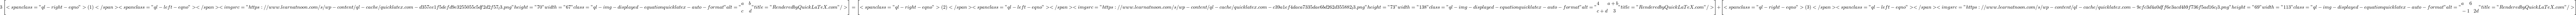 \[3\left[ <span class="ql-right-eqno"> (1) </span><span class="ql-left-eqno">   </span><img src="https://www.learnatnoon.com/s/wp-content/ql-cache/quicklatex.com-d357ee1f5defd9e3255055c5df2d2f57_l3.png" height="70" width="67" class="ql-img-displayed-equation quicklatex-auto-format" alt="\begin{align*}   & a\,\,\,\,\,\,b \\   & c\,\,\,\,\,\,\,d \\  \end{align*}" title="Rendered by QuickLaTeX.com"/> \right]=\left[ <span class="ql-right-eqno"> (2) </span><span class="ql-left-eqno">   </span><img src="https://www.learnatnoon.com/s/wp-content/ql-cache/quicklatex.com-c39a1ef4daca7335dae6bd262d355882_l3.png" height="73" width="138" class="ql-img-displayed-equation quicklatex-auto-format" alt="\begin{align*}   & 4\,\,\,\,\,\,\,\,\,\,a+b \\   & c+d\,\,\,\,\,\,\,3 \\  \end{align*}" title="Rendered by QuickLaTeX.com"/> \right]+\left[ <span class="ql-right-eqno"> (3) </span><span class="ql-left-eqno">   </span><img src="https://www.learnatnoon.com/s/wp-content/ql-cache/quicklatex.com-9cfc3d4a0dff6e3acd4b9f736f5ad16c_l3.png" height="69" width="113" class="ql-img-displayed-equation quicklatex-auto-format" alt="\begin{align*}   & a\,\,\,\,\,\,\,6 \\   & -1\,\,\,\,\,2d \\  \end{align*}" title="Rendered by QuickLaTeX.com"/> \right]\]